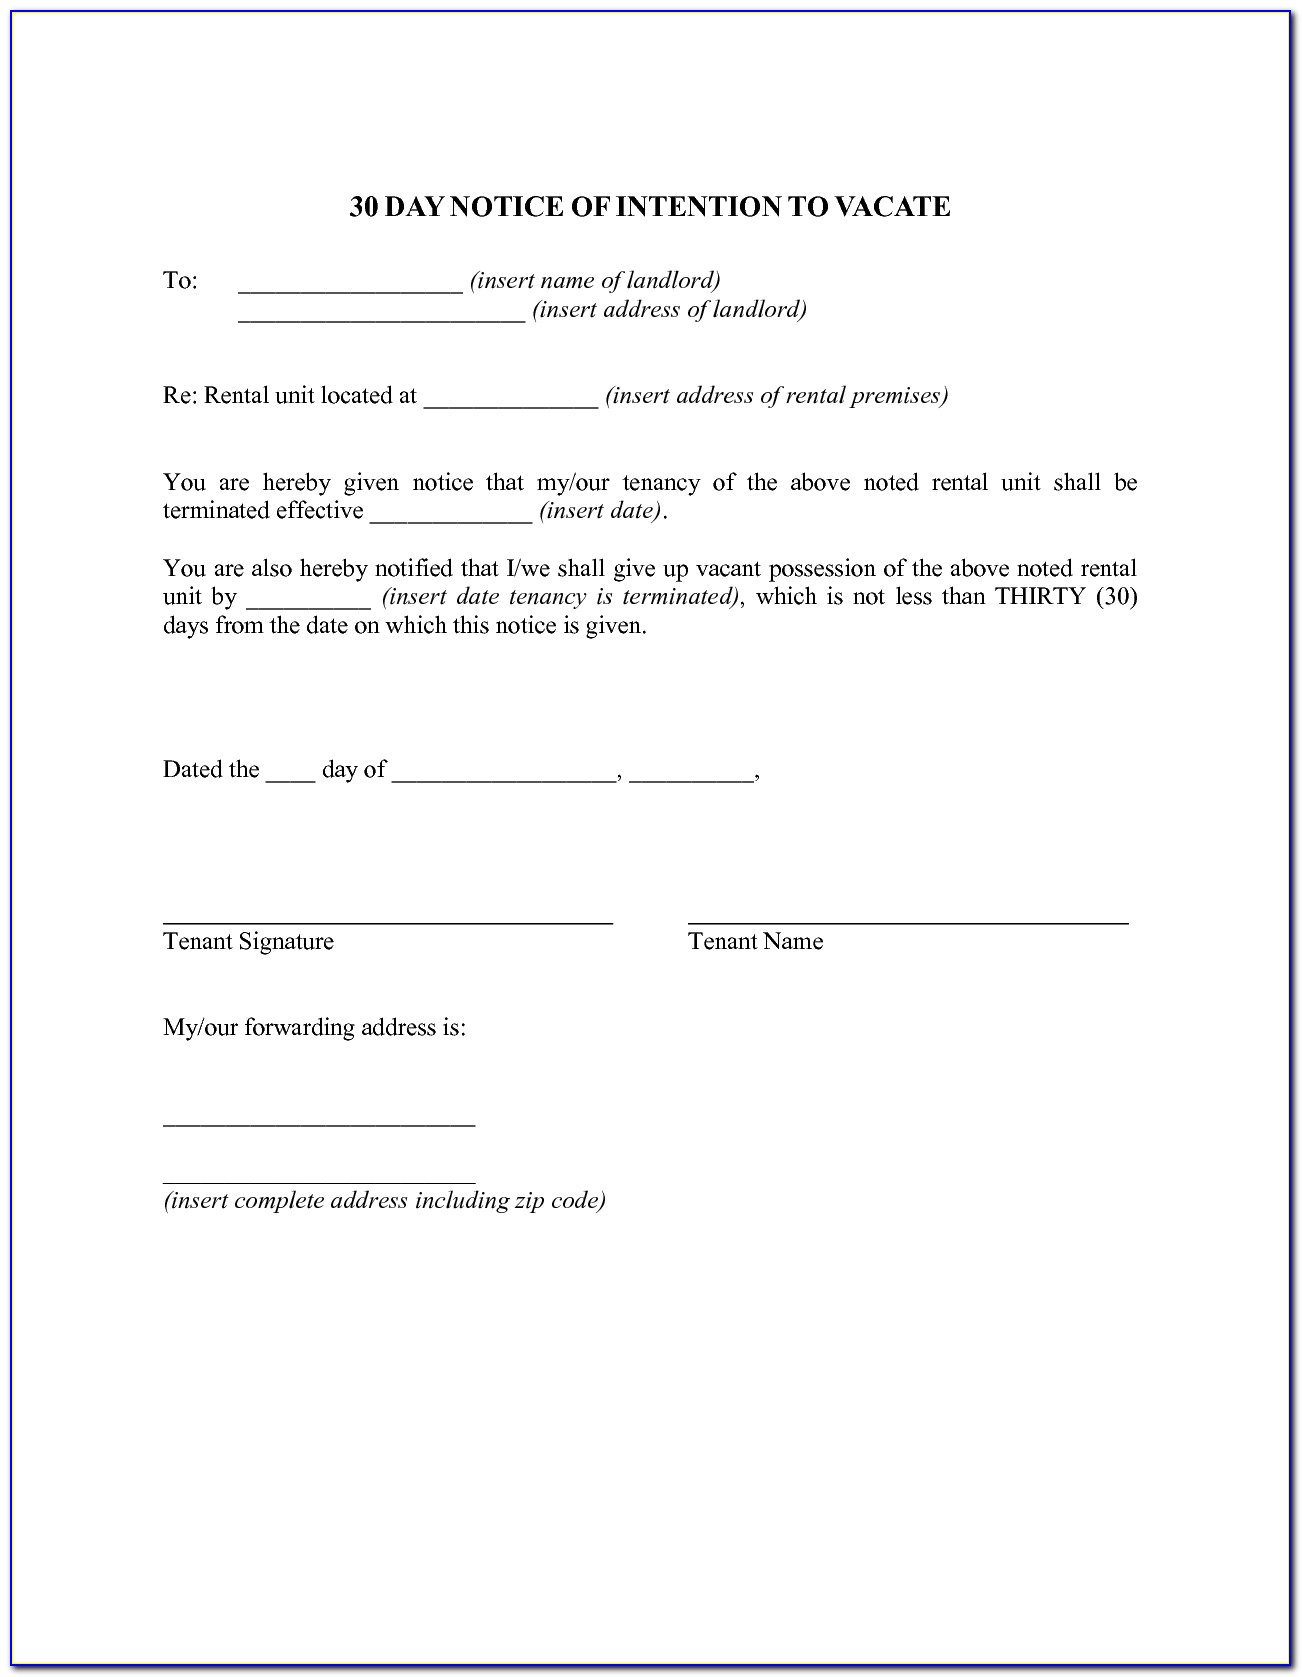 Landlord 30 Day Notice To Vacate Form